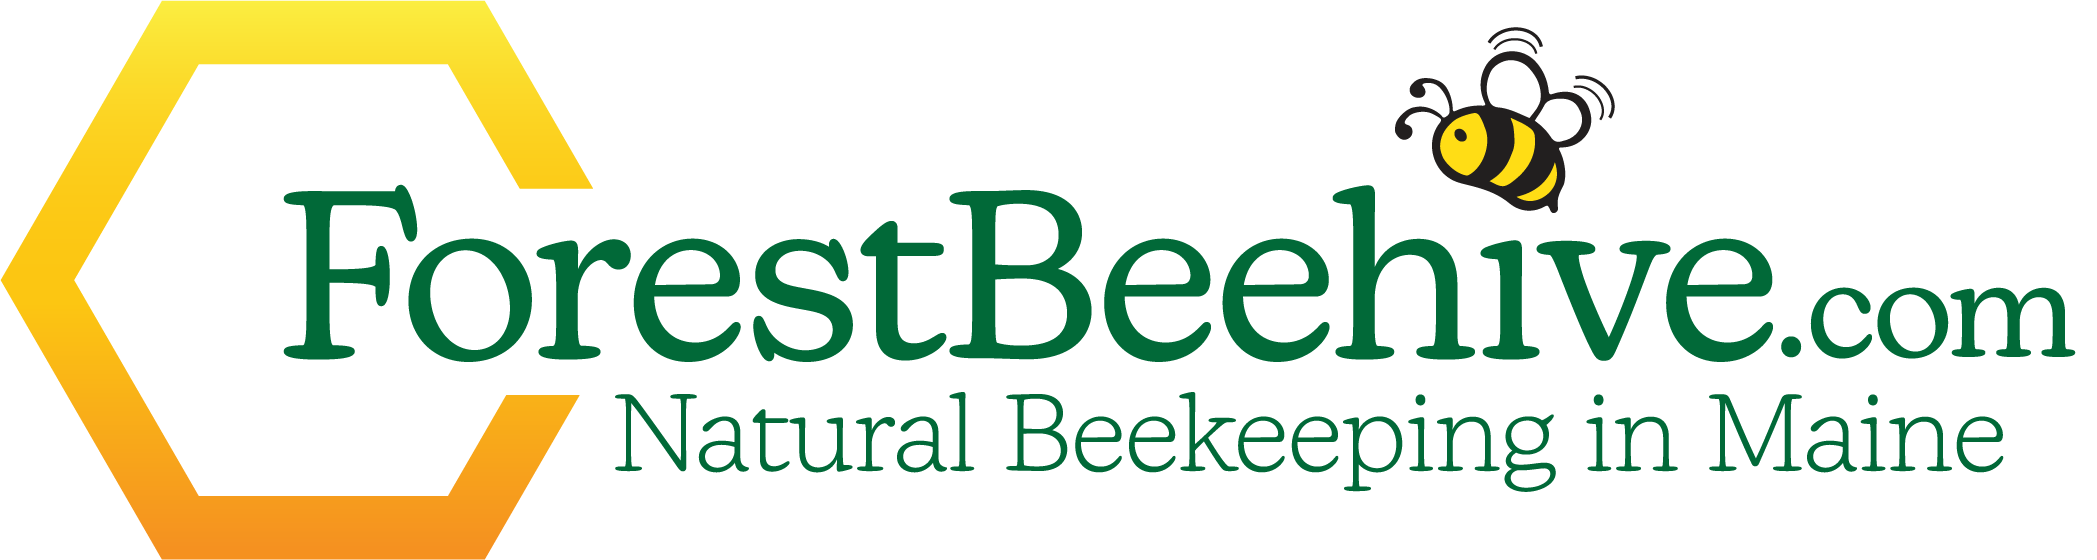 forestbeehive.com – Natural Beekeeping in Maine